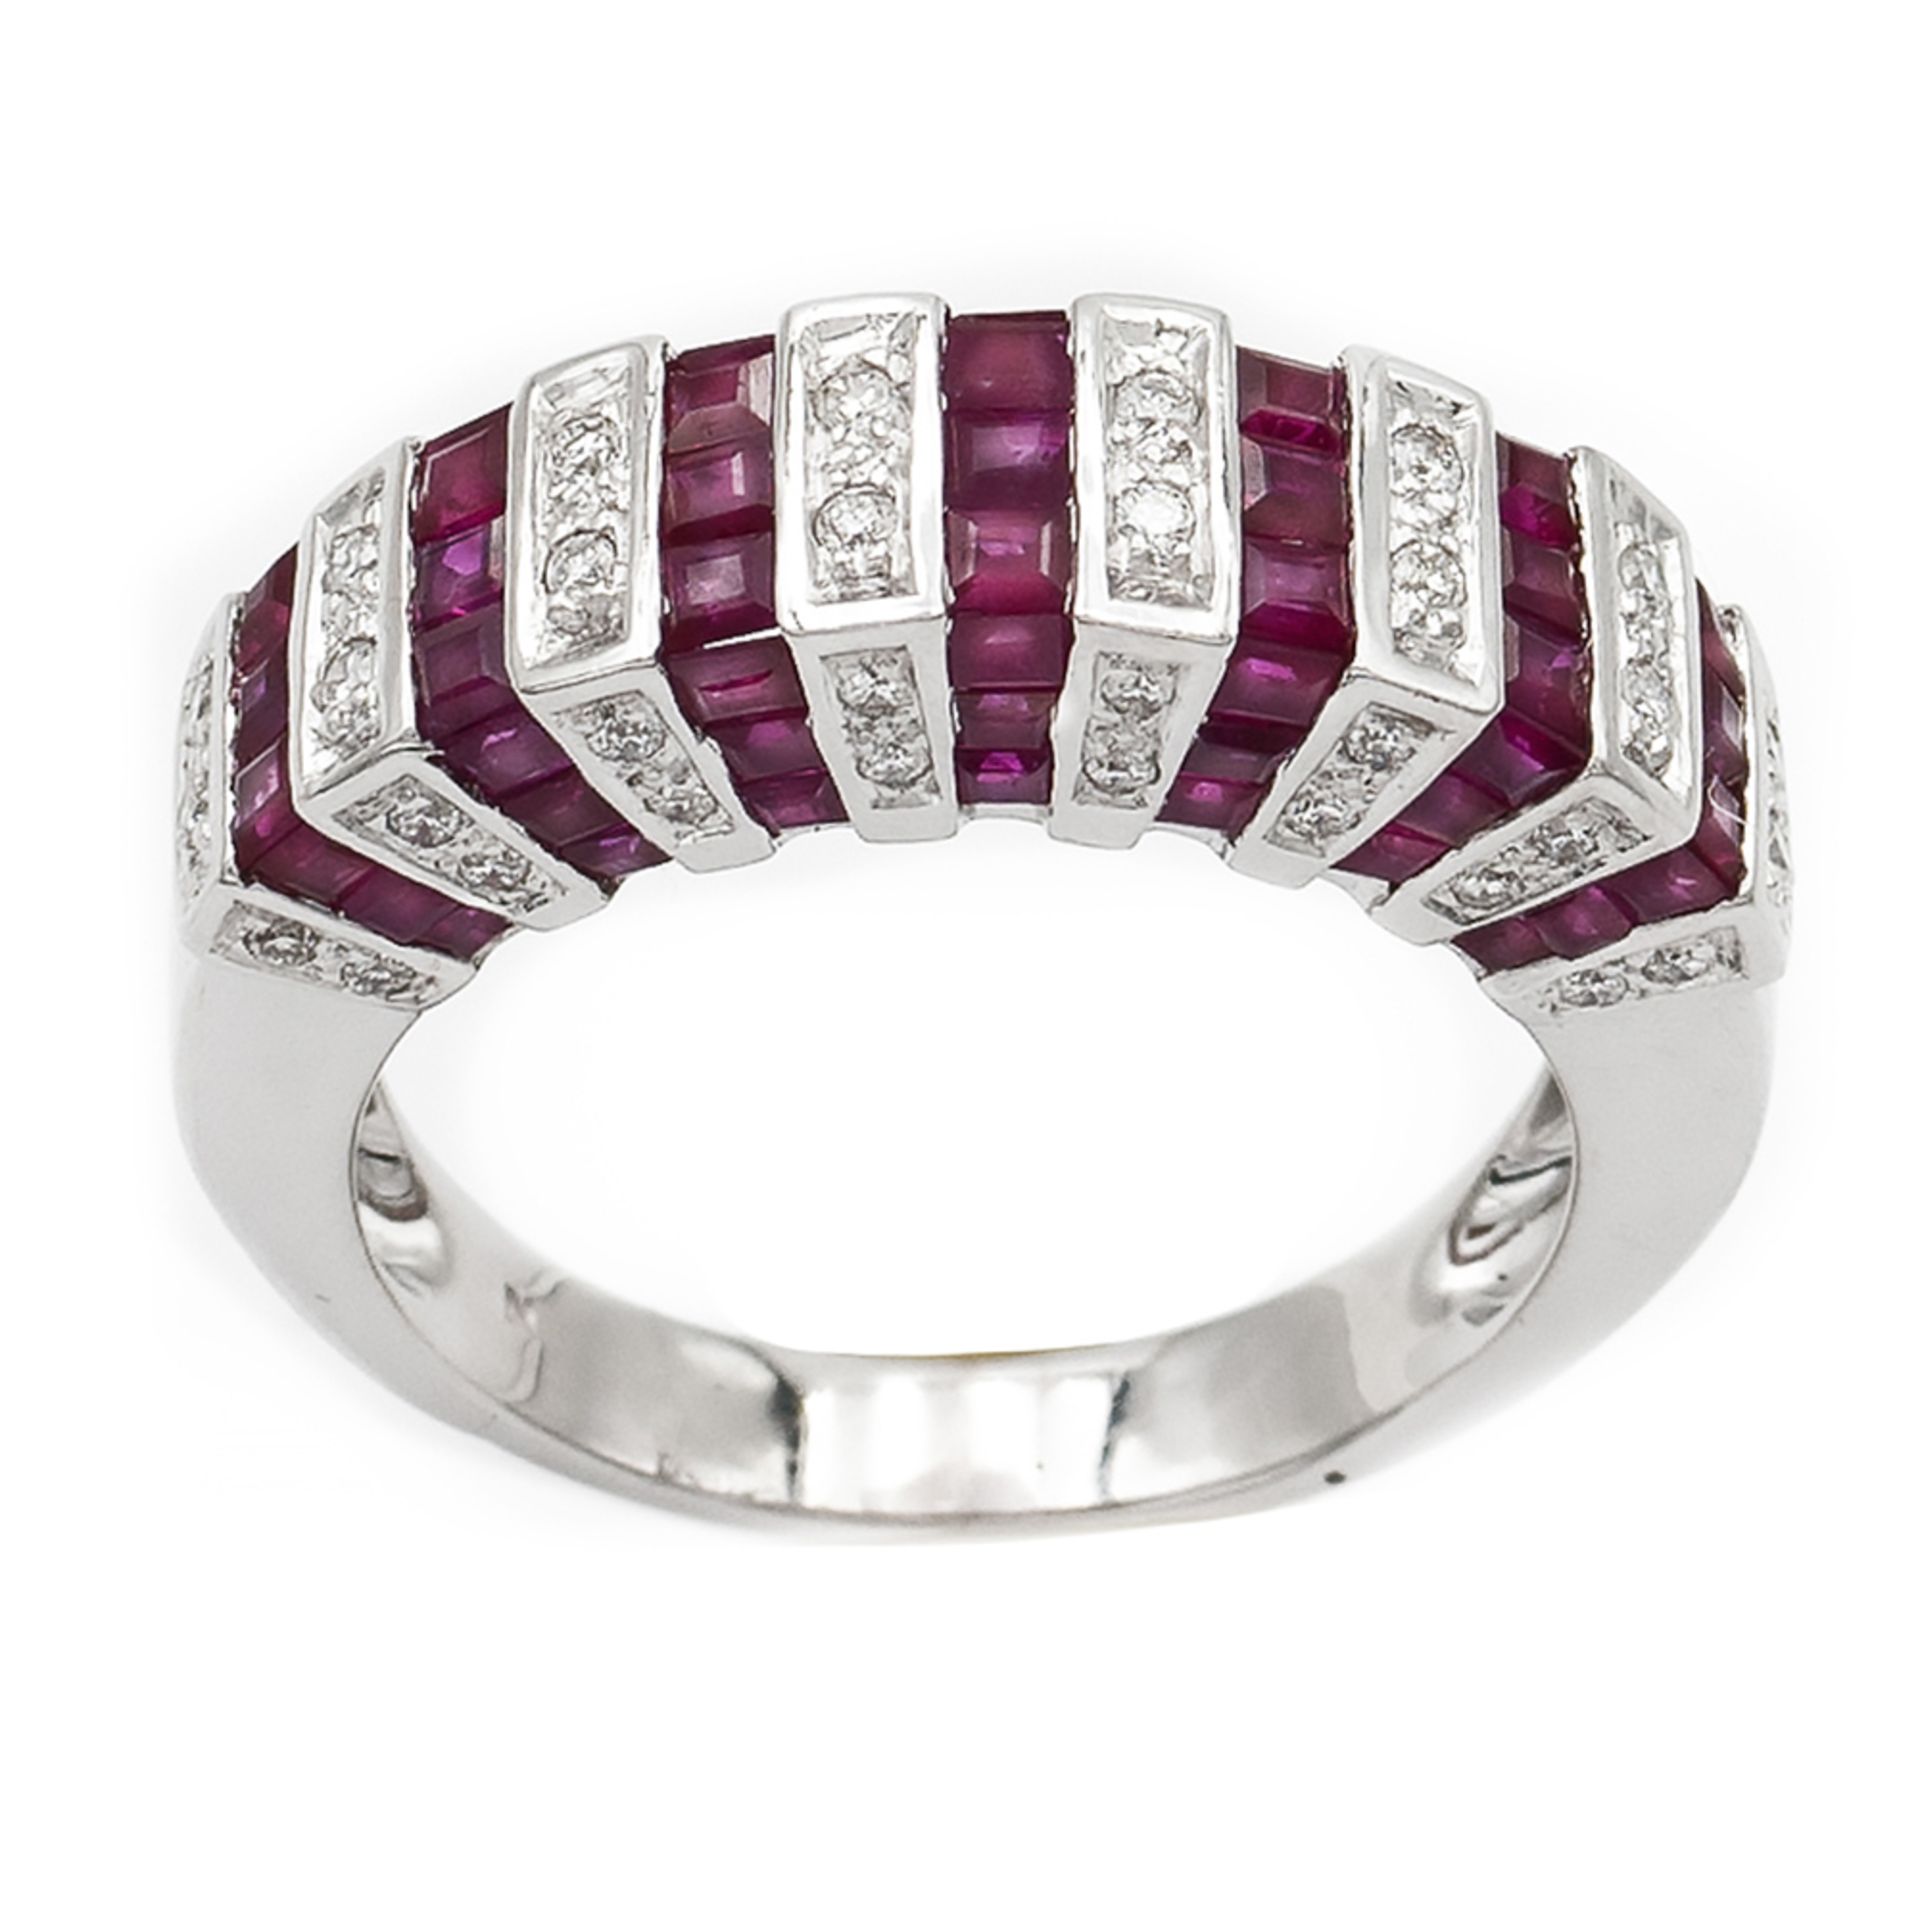 Platinum, diamond and rubies rivière ring weight 7,5 gr. - Image 2 of 2